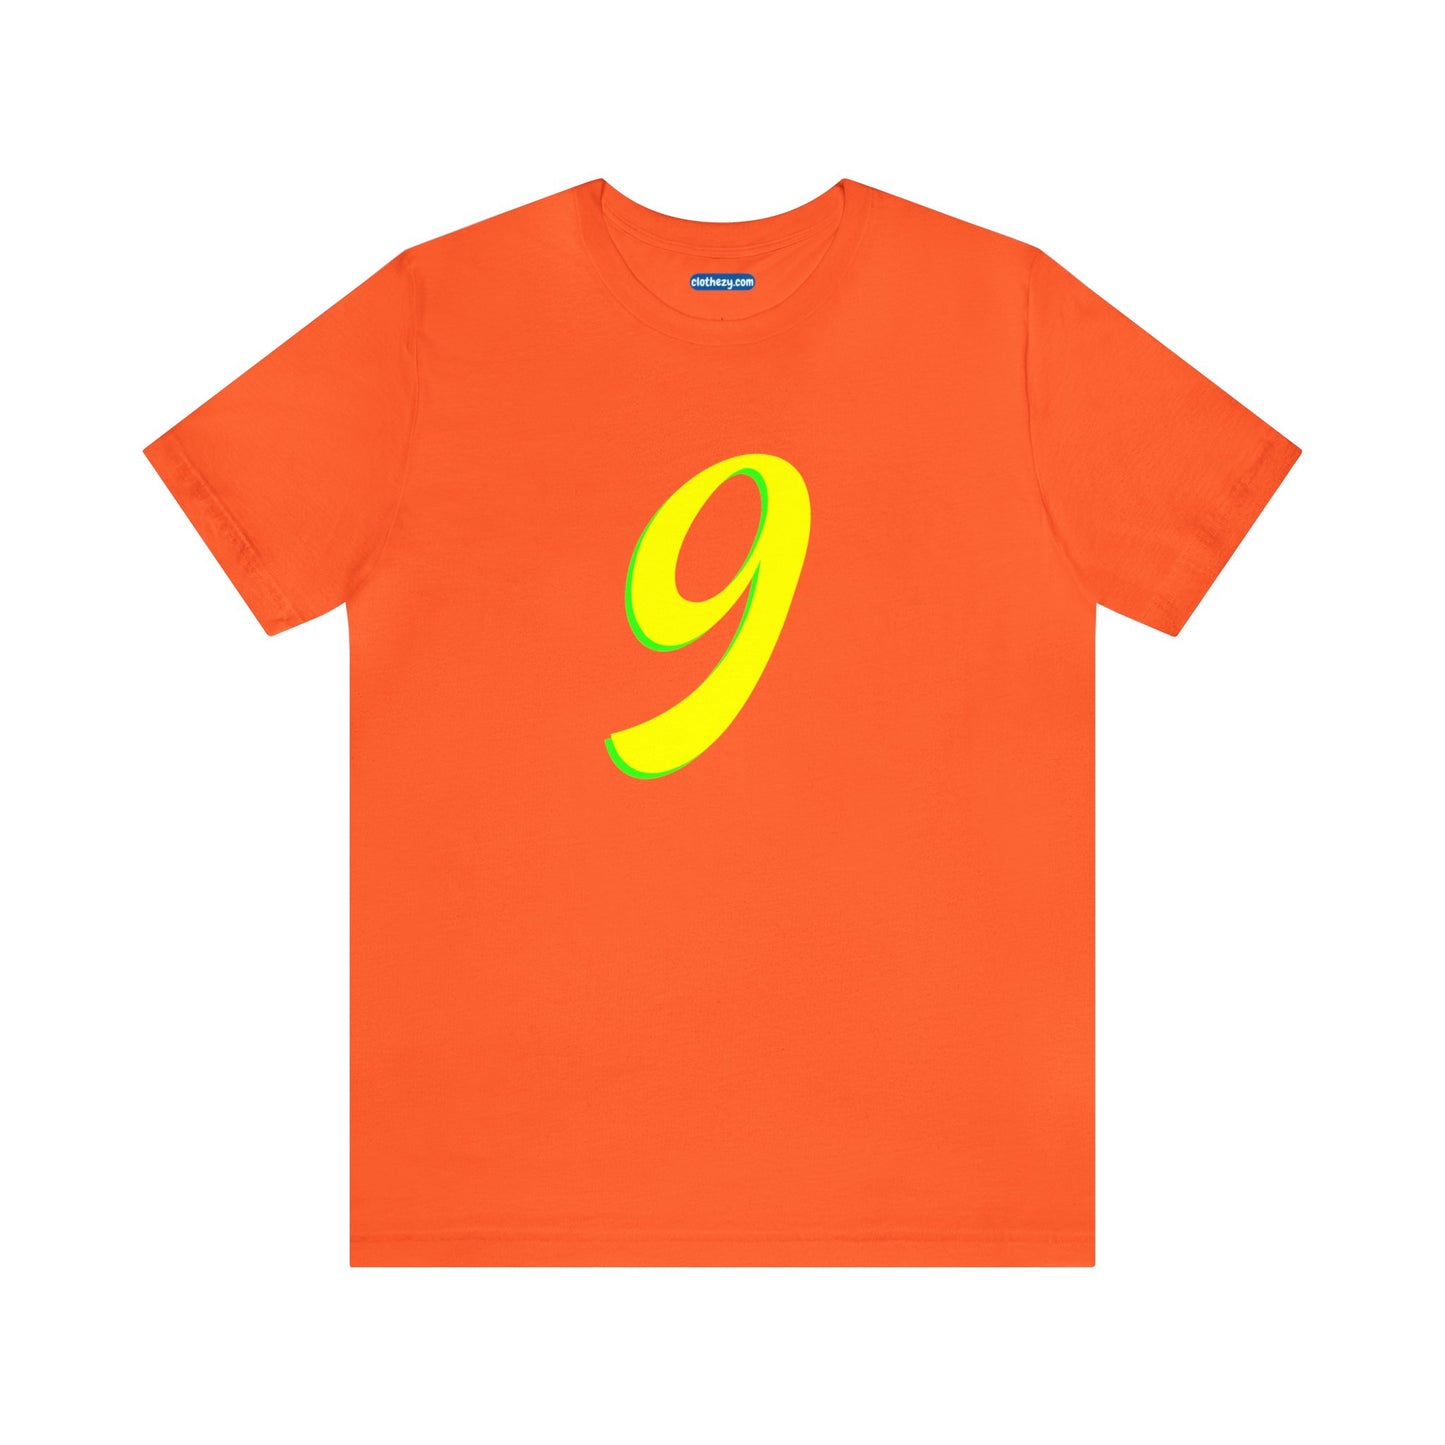 Number 9 Design - Soft Cotton Tee for birthdays and celebrations, Gift for friends and family, Multiple Options by clothezy.com in Orange Size Small - Buy Now